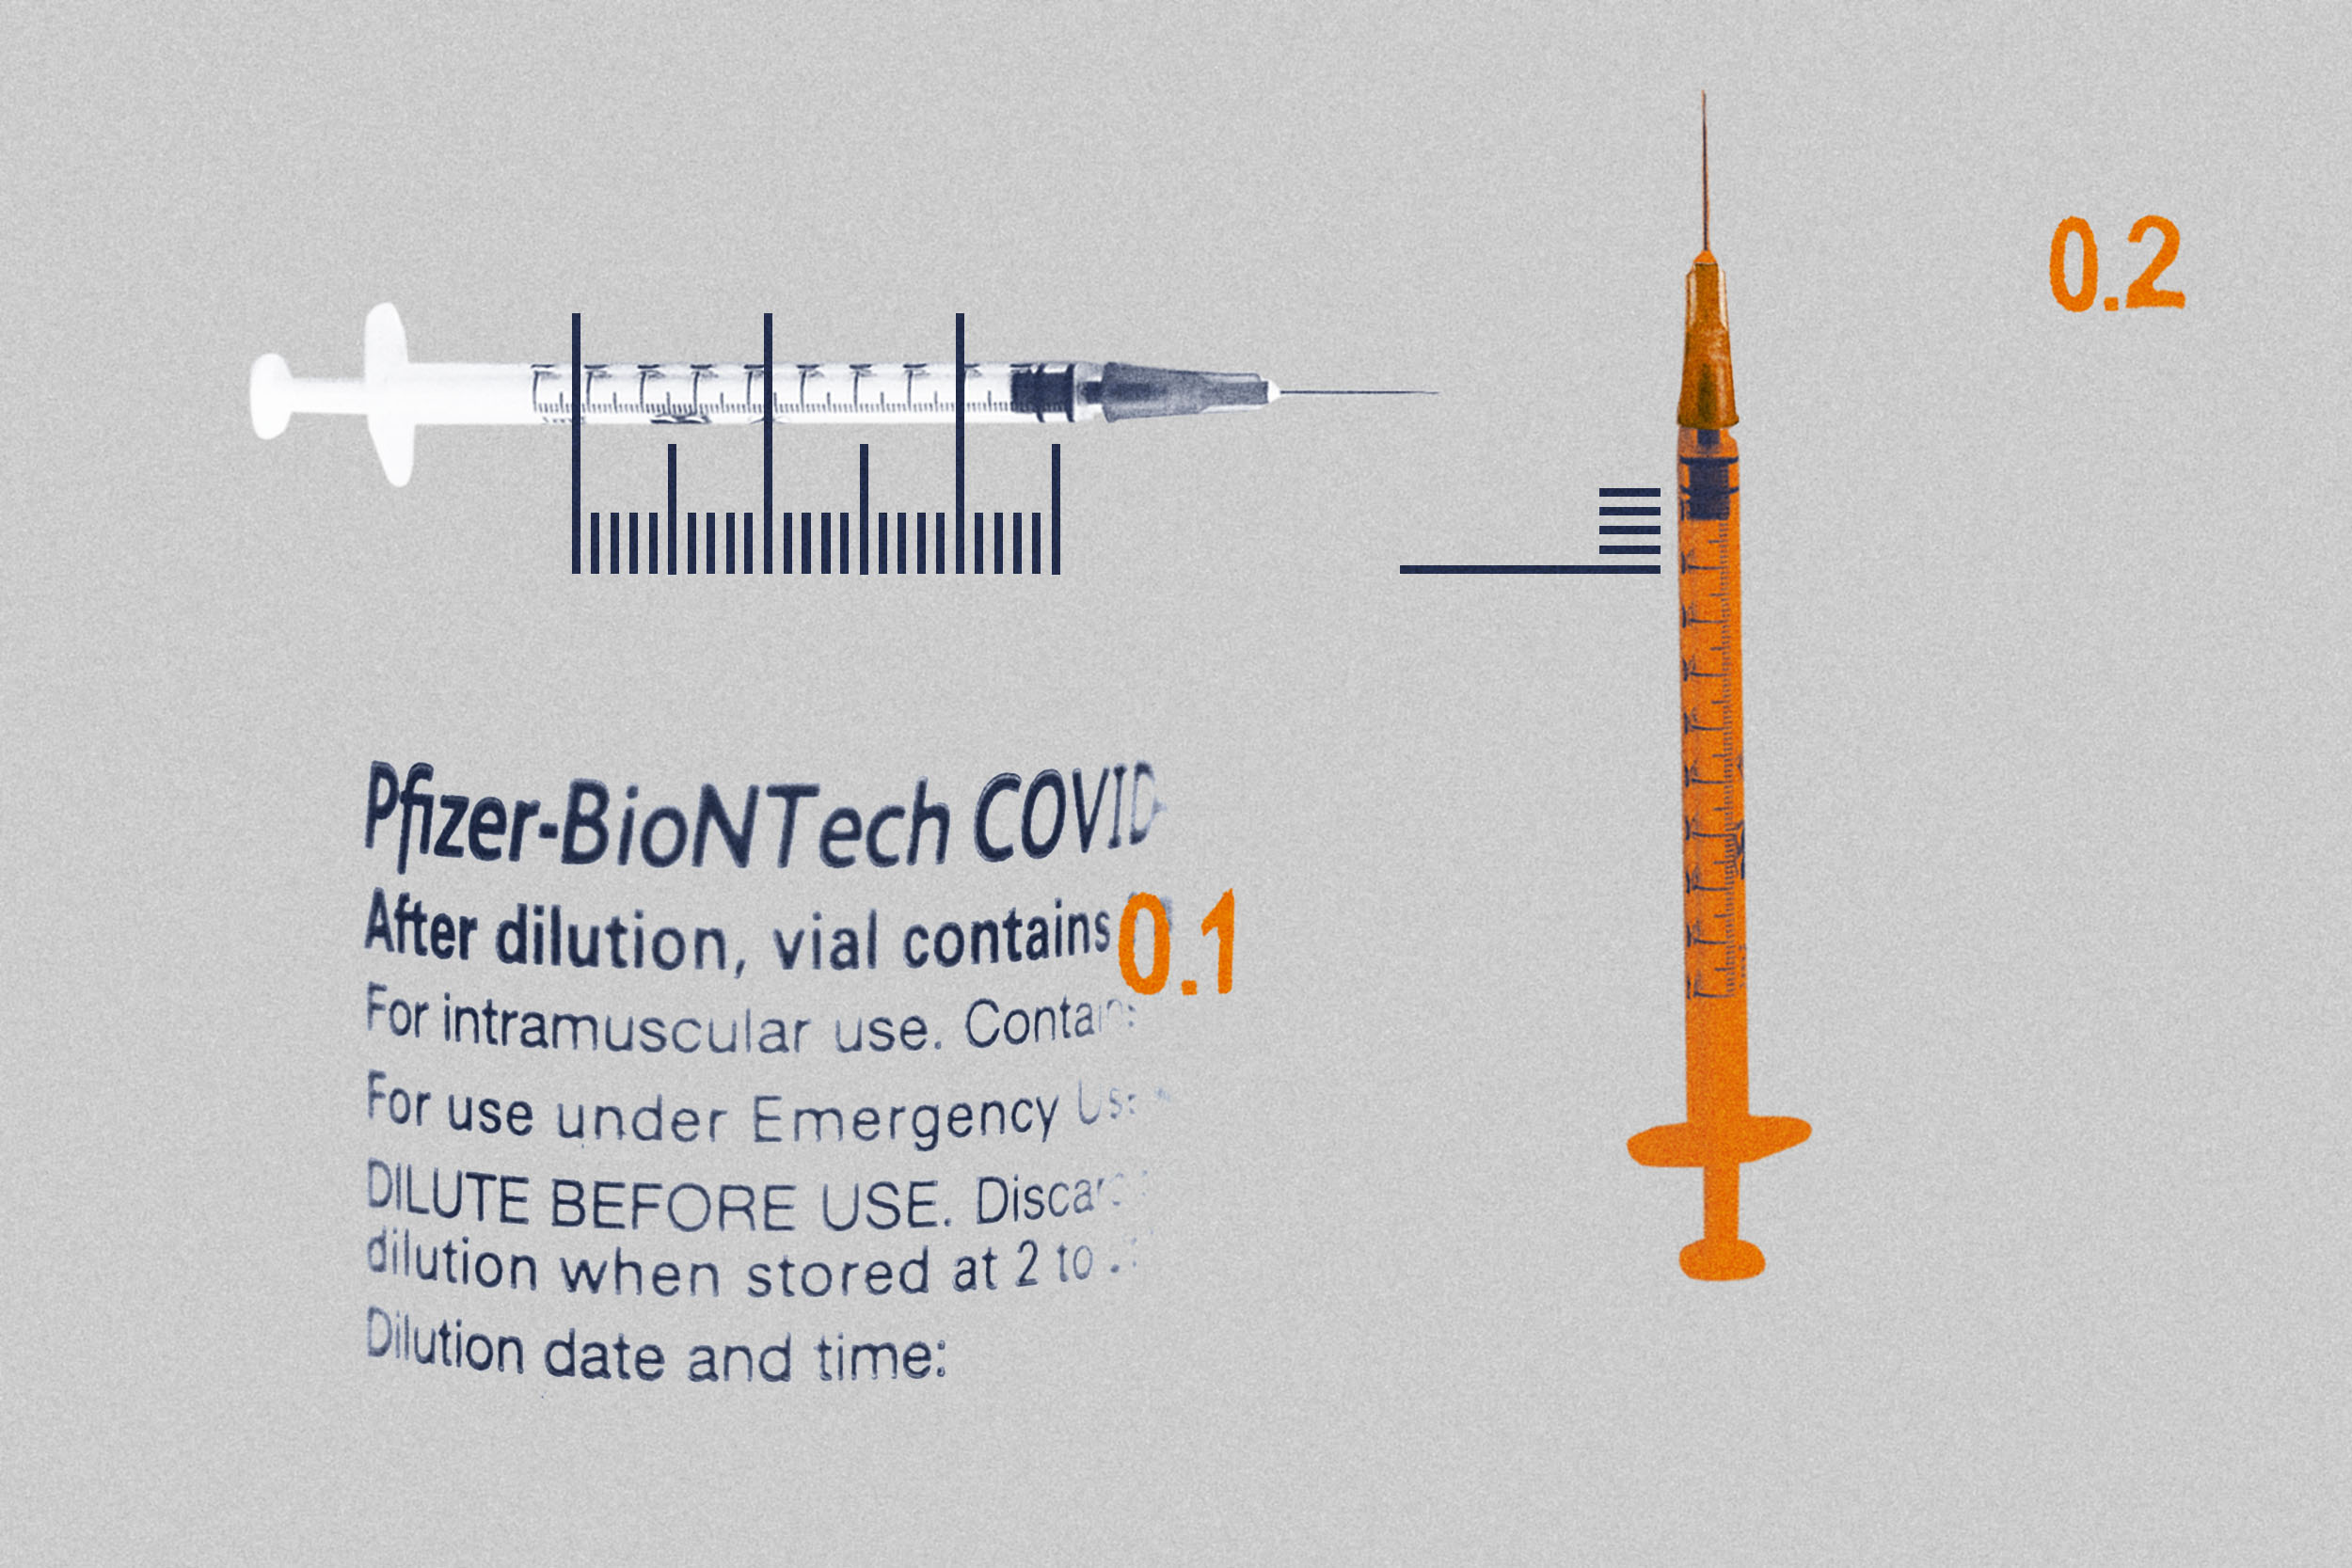 Illustration with syringes and Pfizer-BioNTech Covid vaccine label